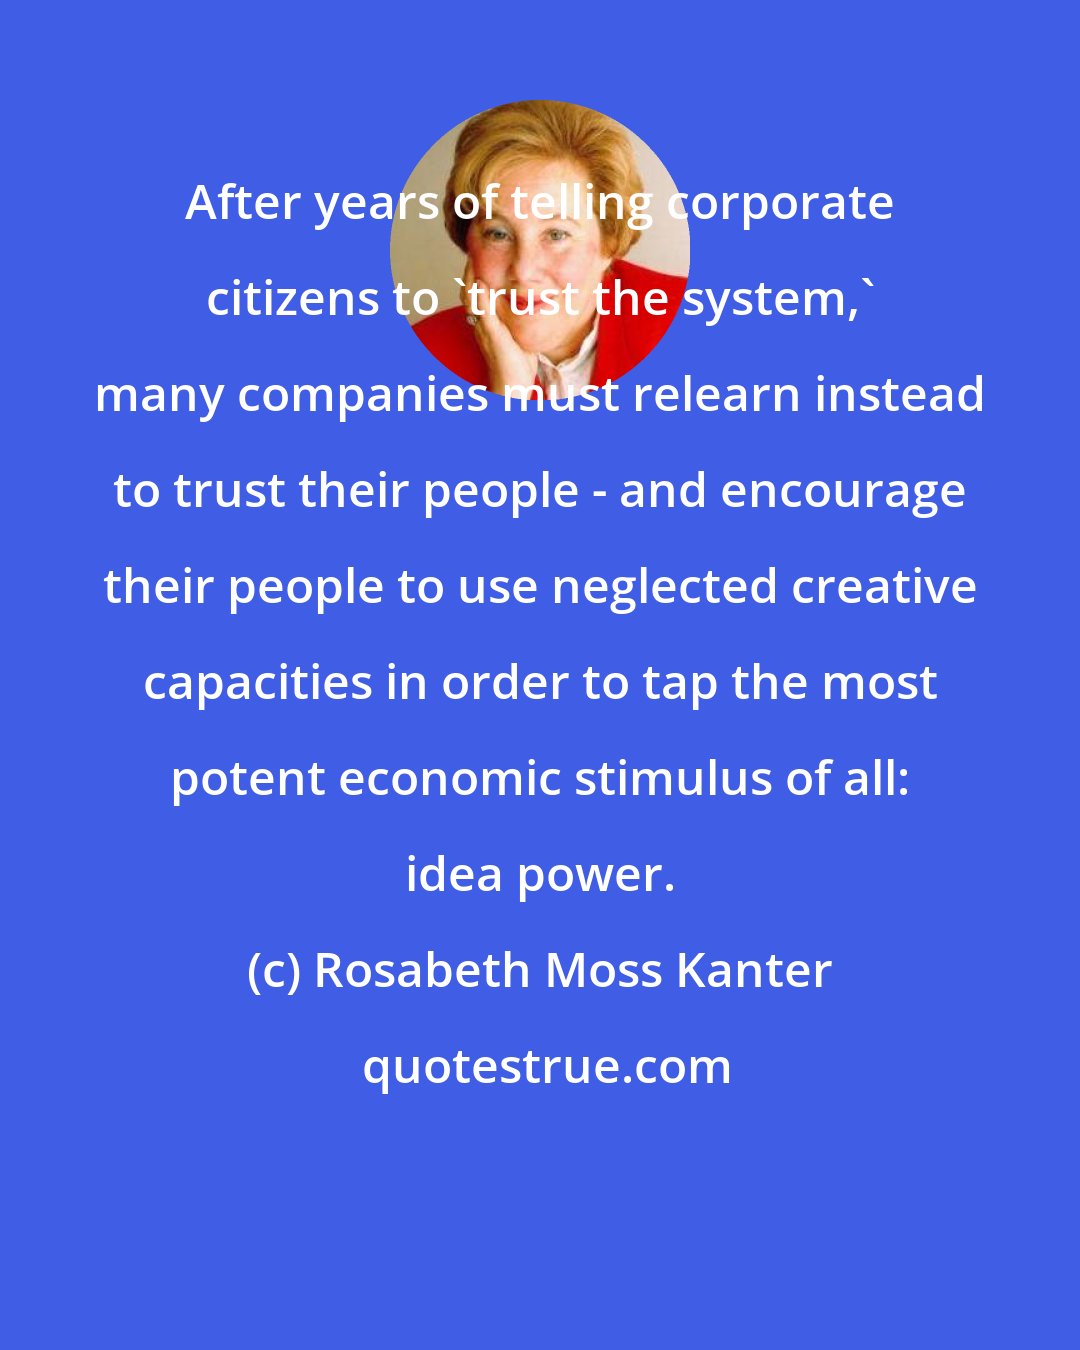 Rosabeth Moss Kanter: After years of telling corporate citizens to 'trust the system,' many companies must relearn instead to trust their people - and encourage their people to use neglected creative capacities in order to tap the most potent economic stimulus of all: idea power.